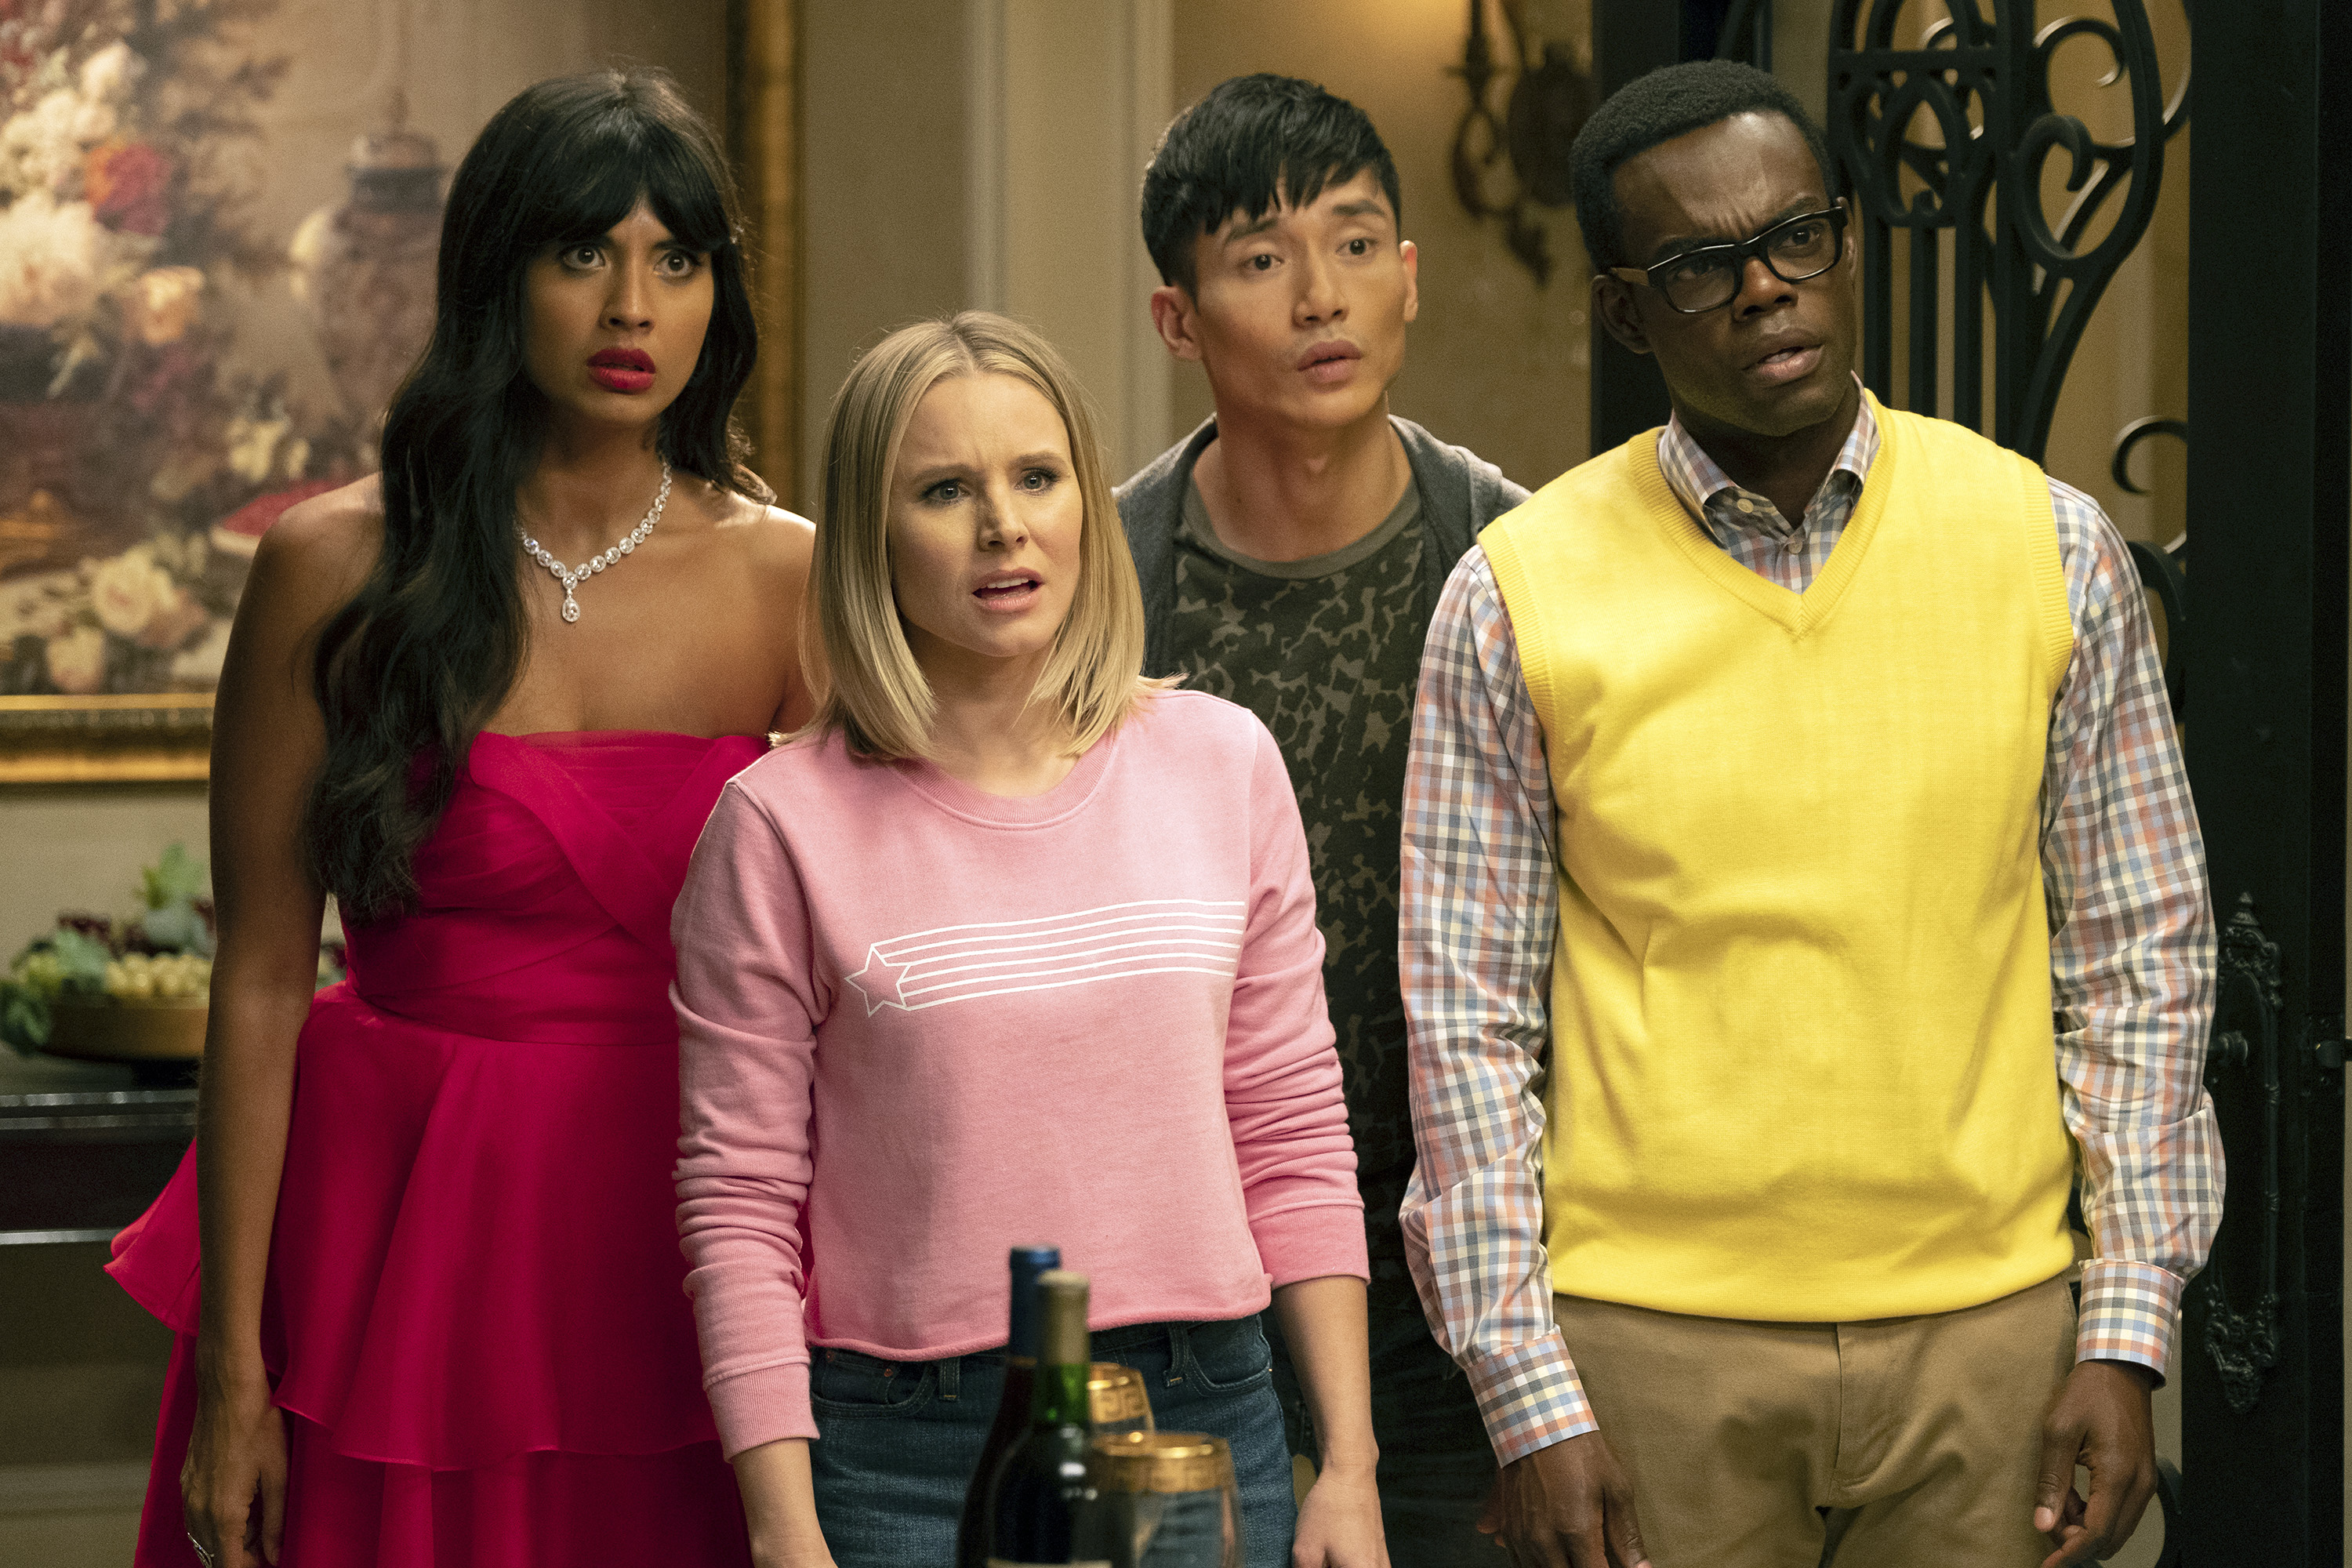 (L-R) Jameela Jamil as Tahani, Kristen Bell as Eleanor Shellstrop, Manny Jacinto as Jason Mendoza, and William Jackson Harper as Chidi on The Good Place. (Colleen Hayes—NBCUniversal via Getty Images)